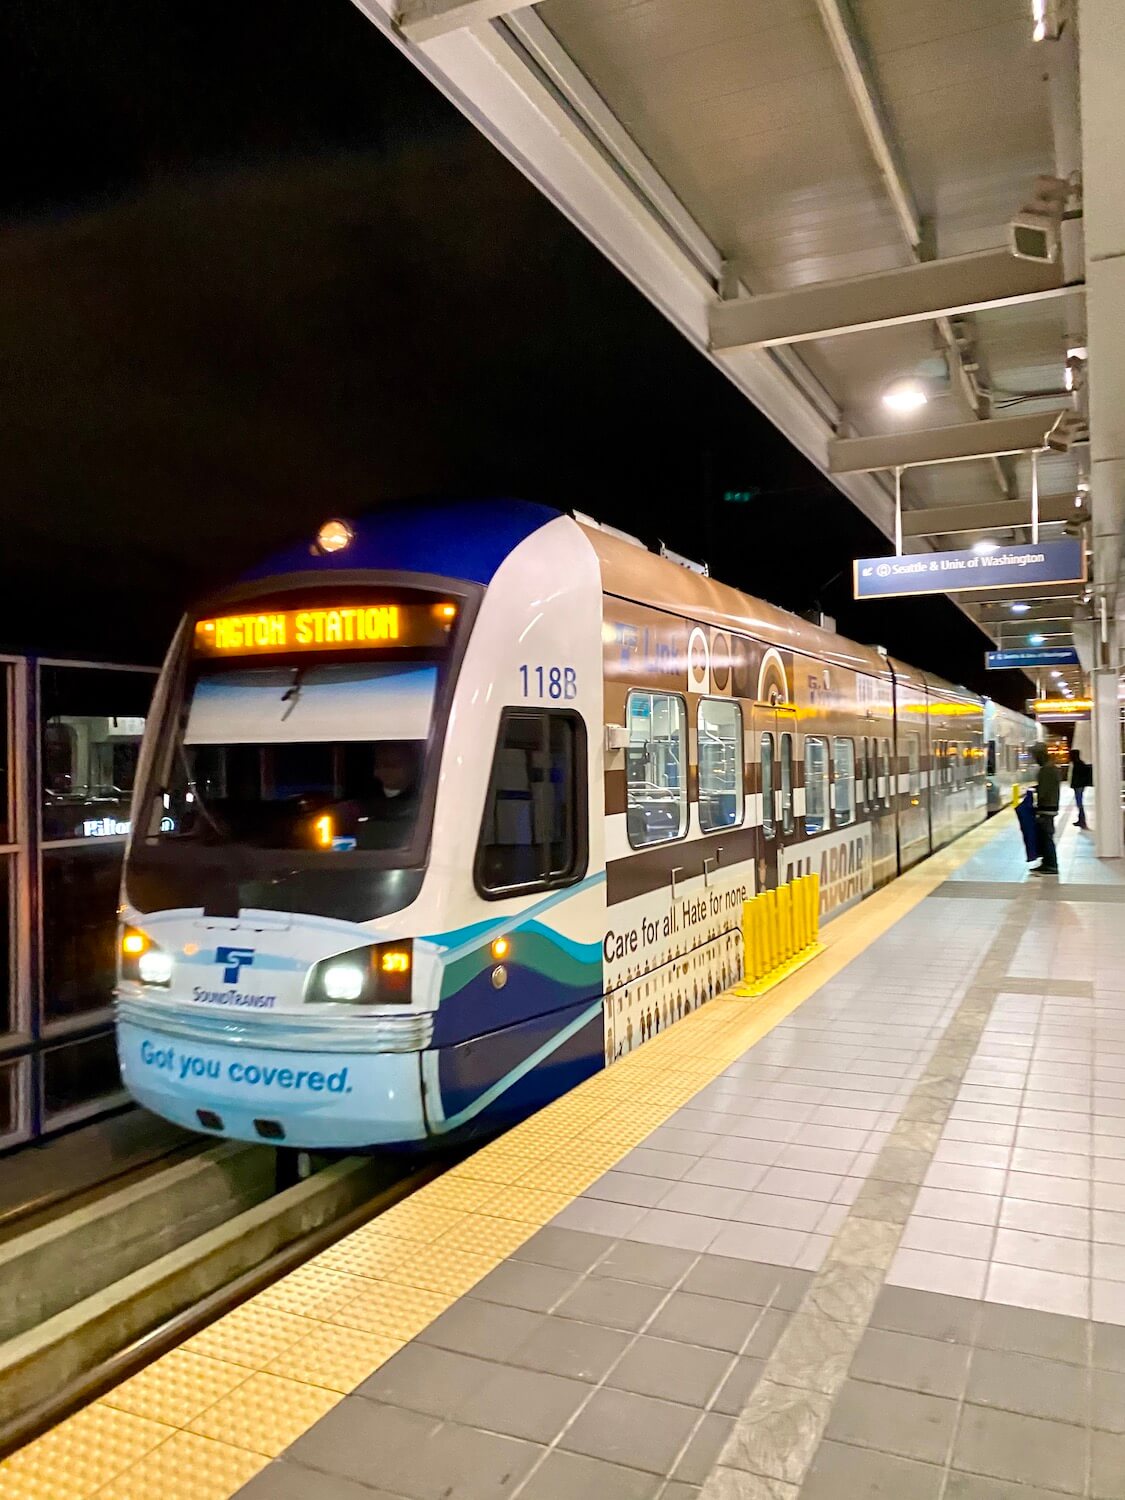 A Link Light Rail train waits at the station in a nighttime scene at Seatac Airport, preparing to head into the city center.  The train is white with a mixture of blue and green paint as well as ads on the side of the car. 